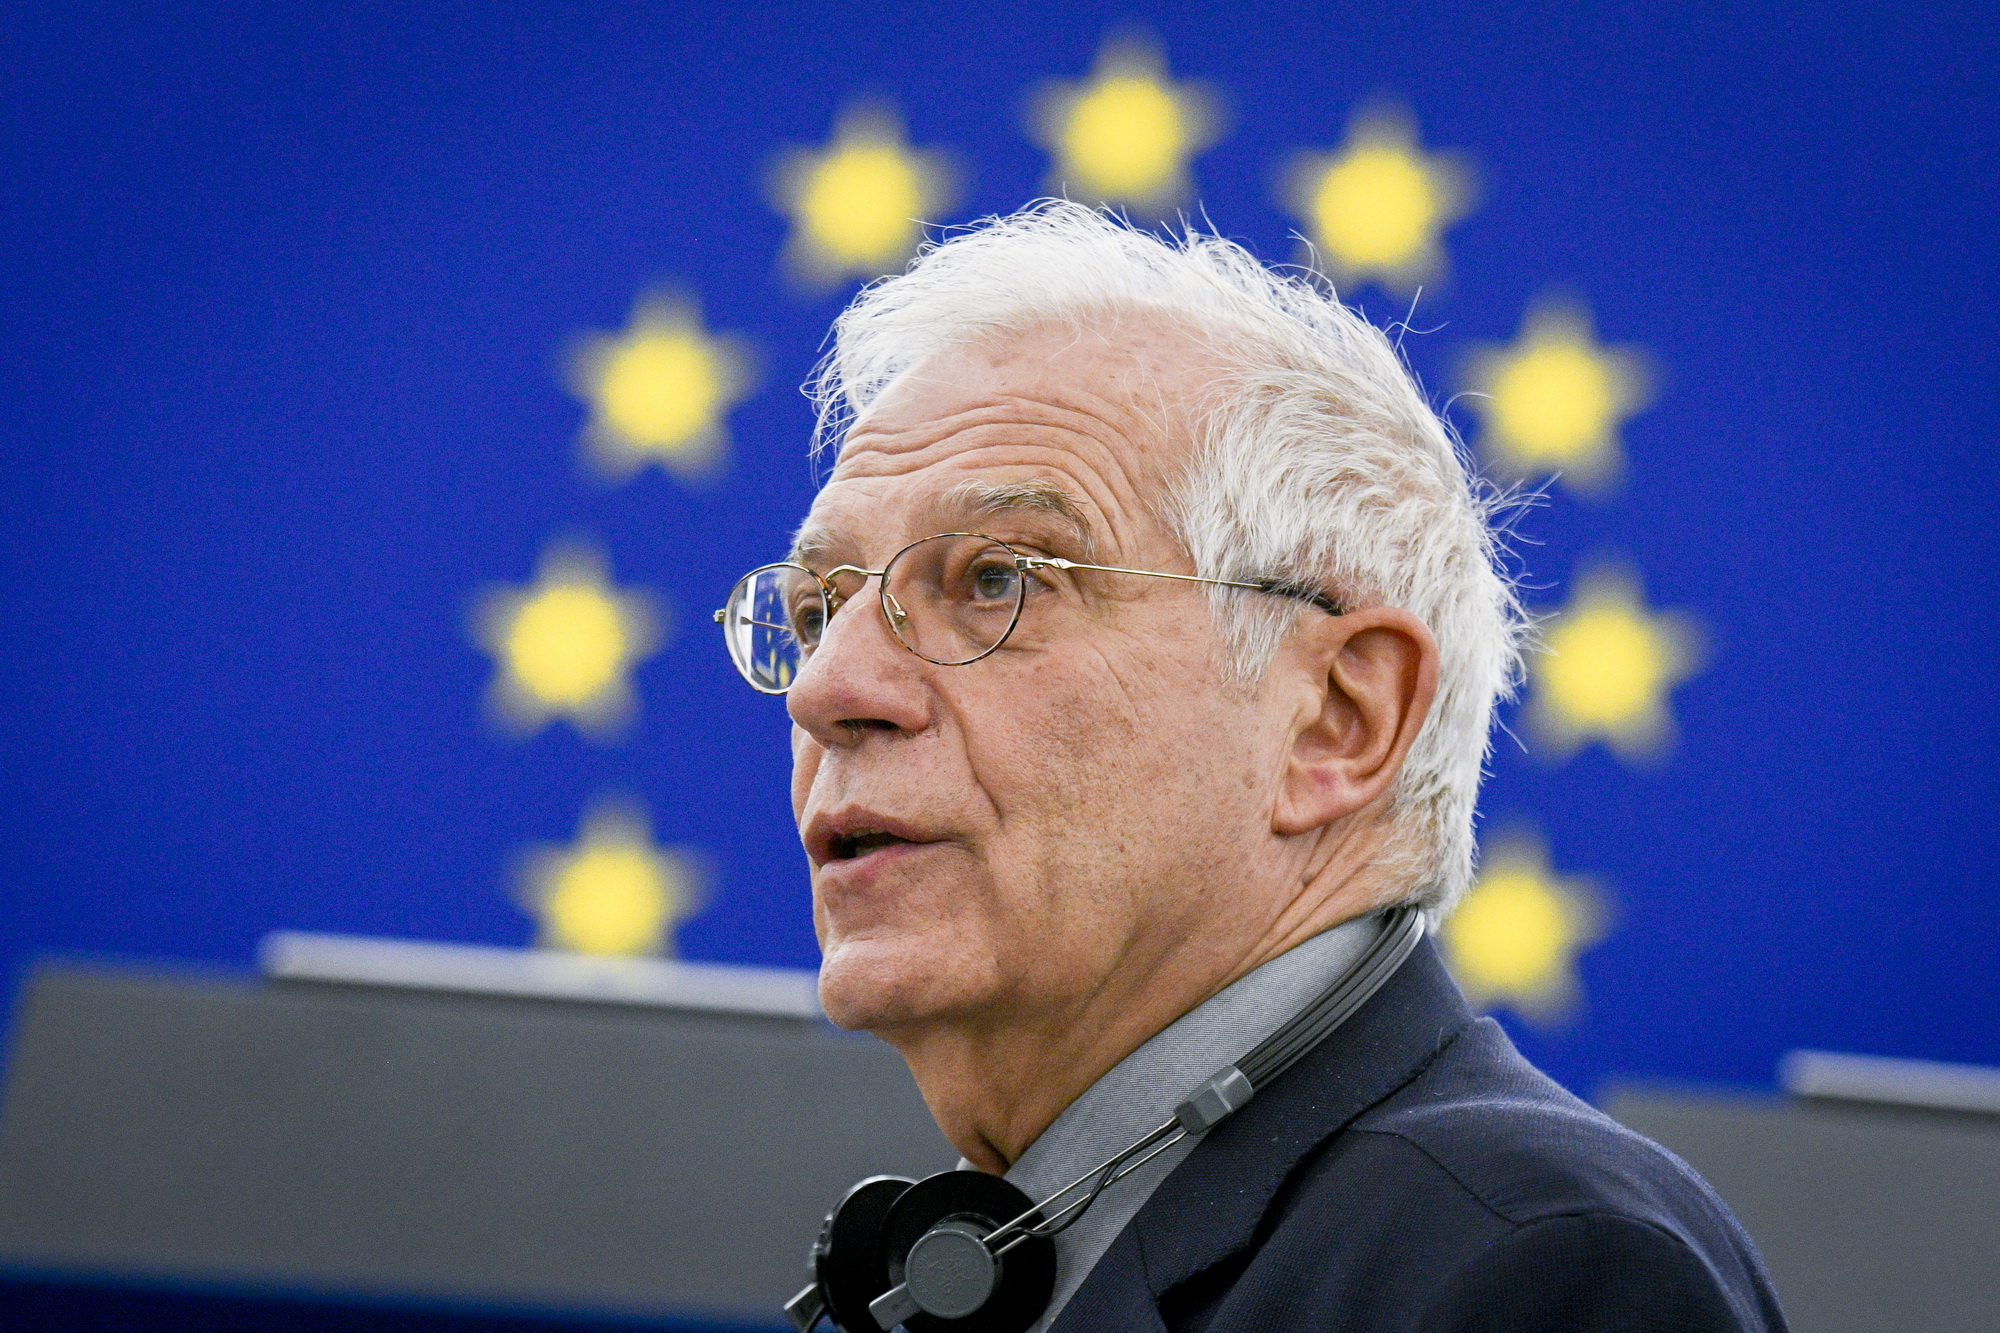 EU’s top diplomat Borrell to visit Ukraine on Jan. 4-6 in show of support